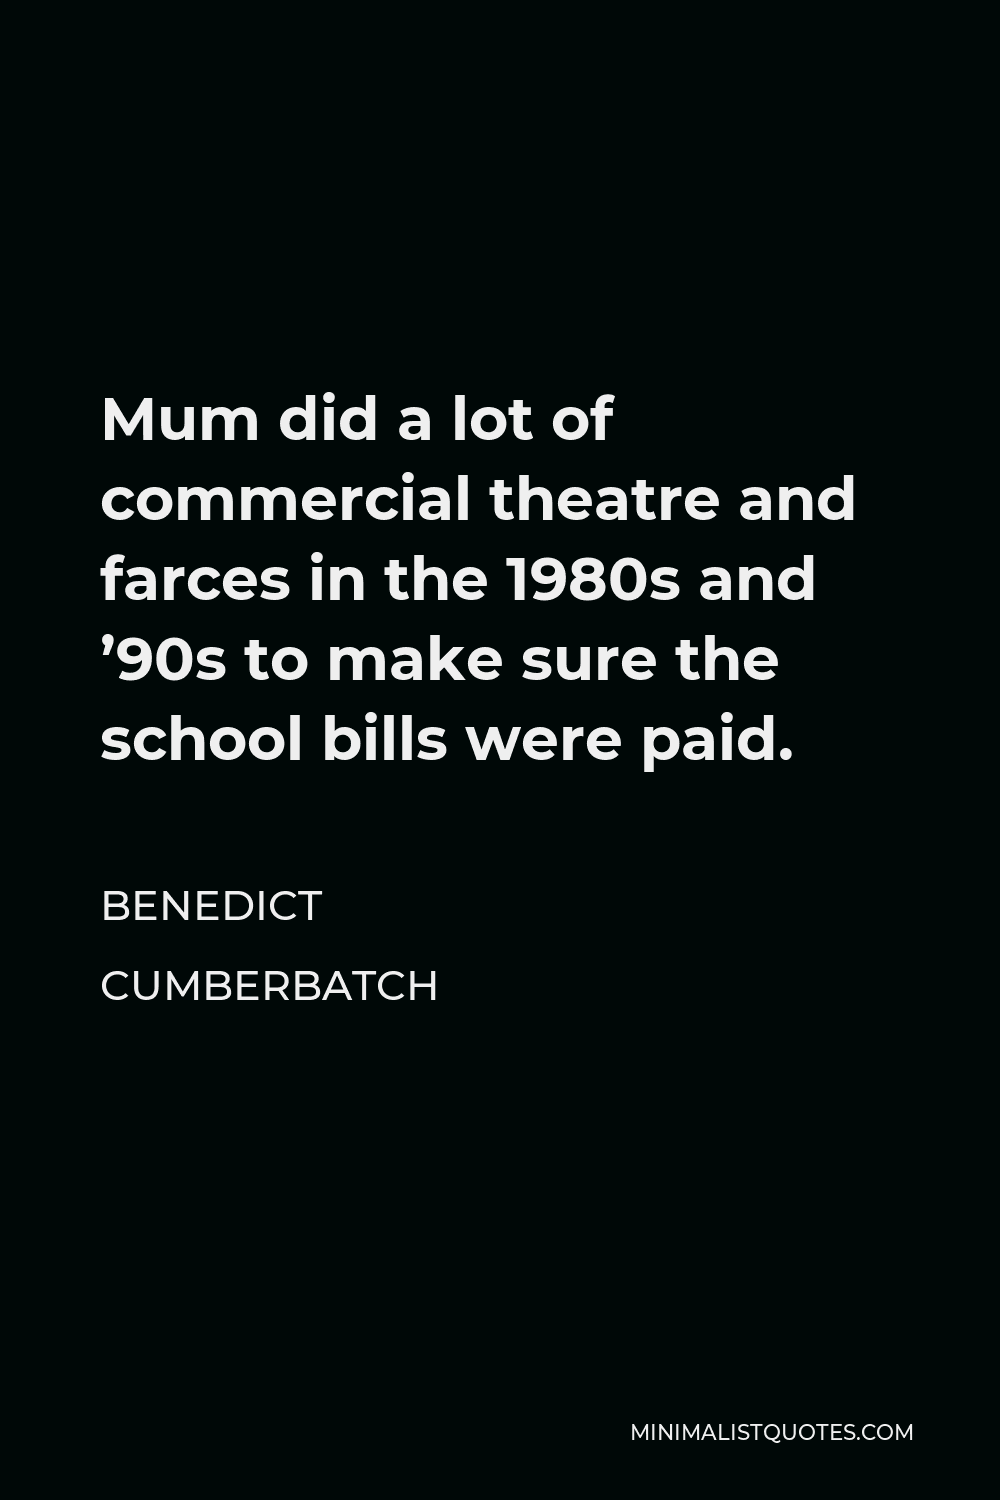 Benedict Cumberbatch Quote - Mum did a lot of commercial theatre and farces in the 1980s and ’90s to make sure the school bills were paid.